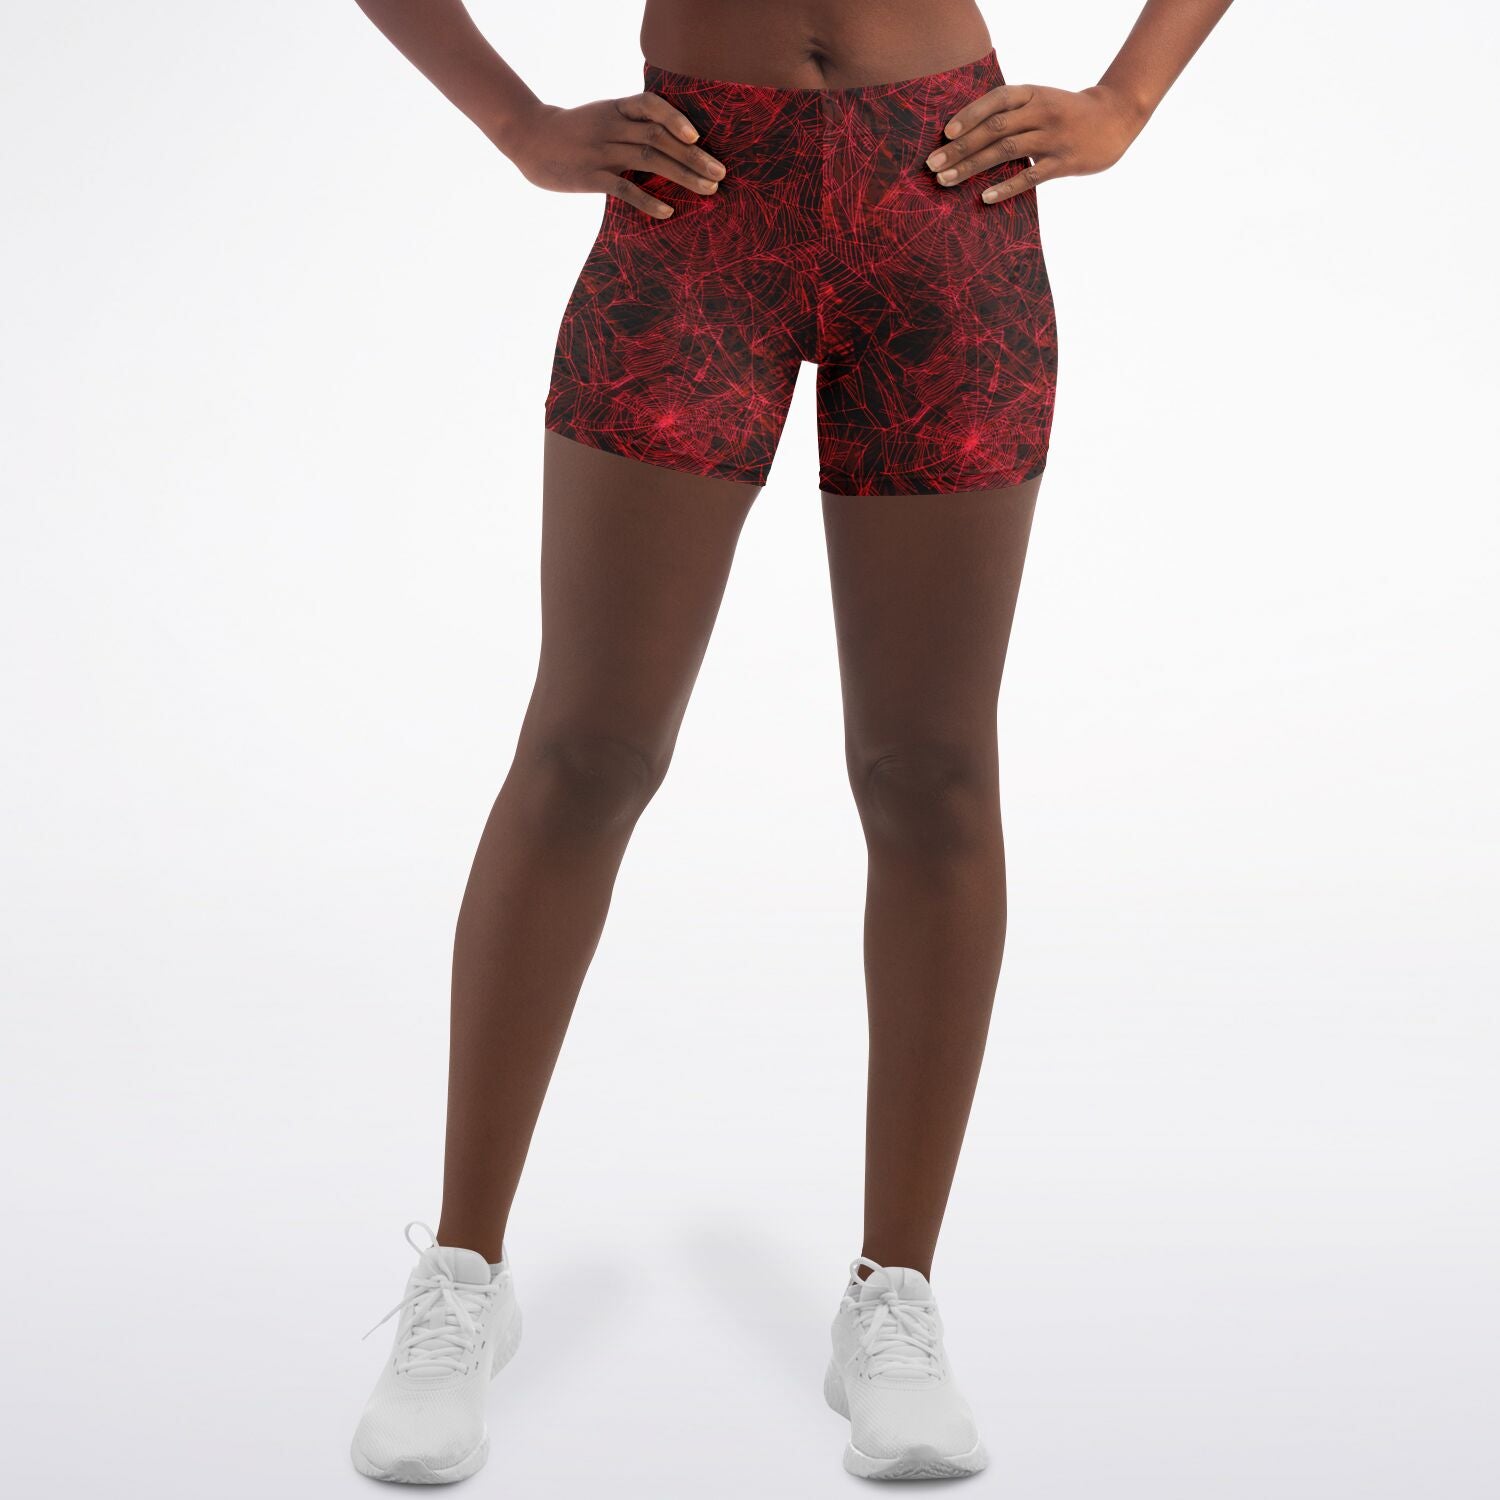 Red Spider Web Shorts